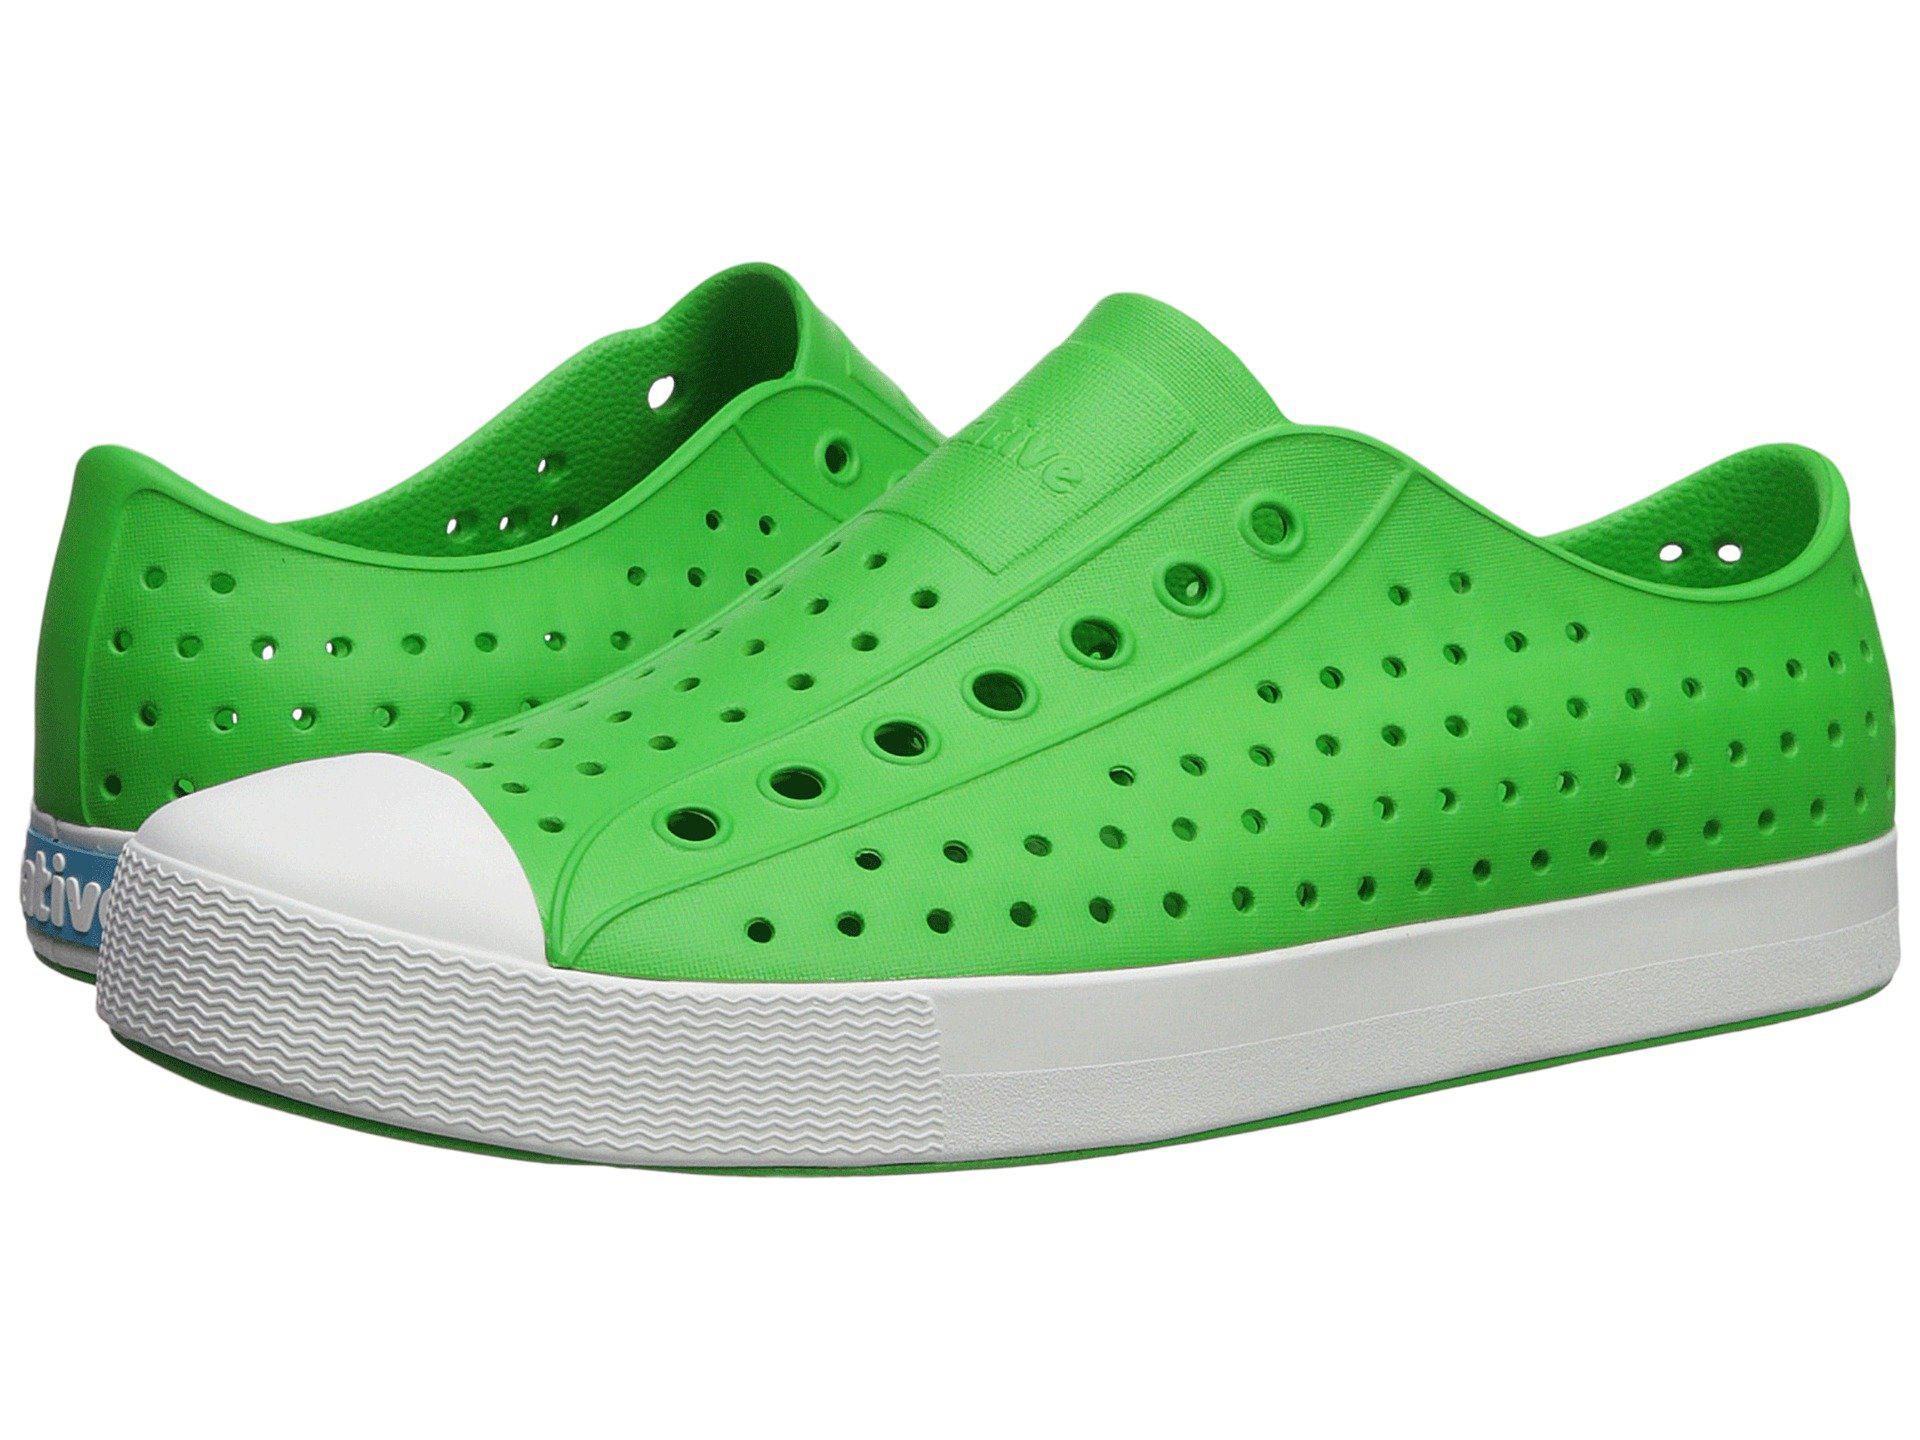 Native Shoes Kid's Jefferson Perforated Sneakers in Green